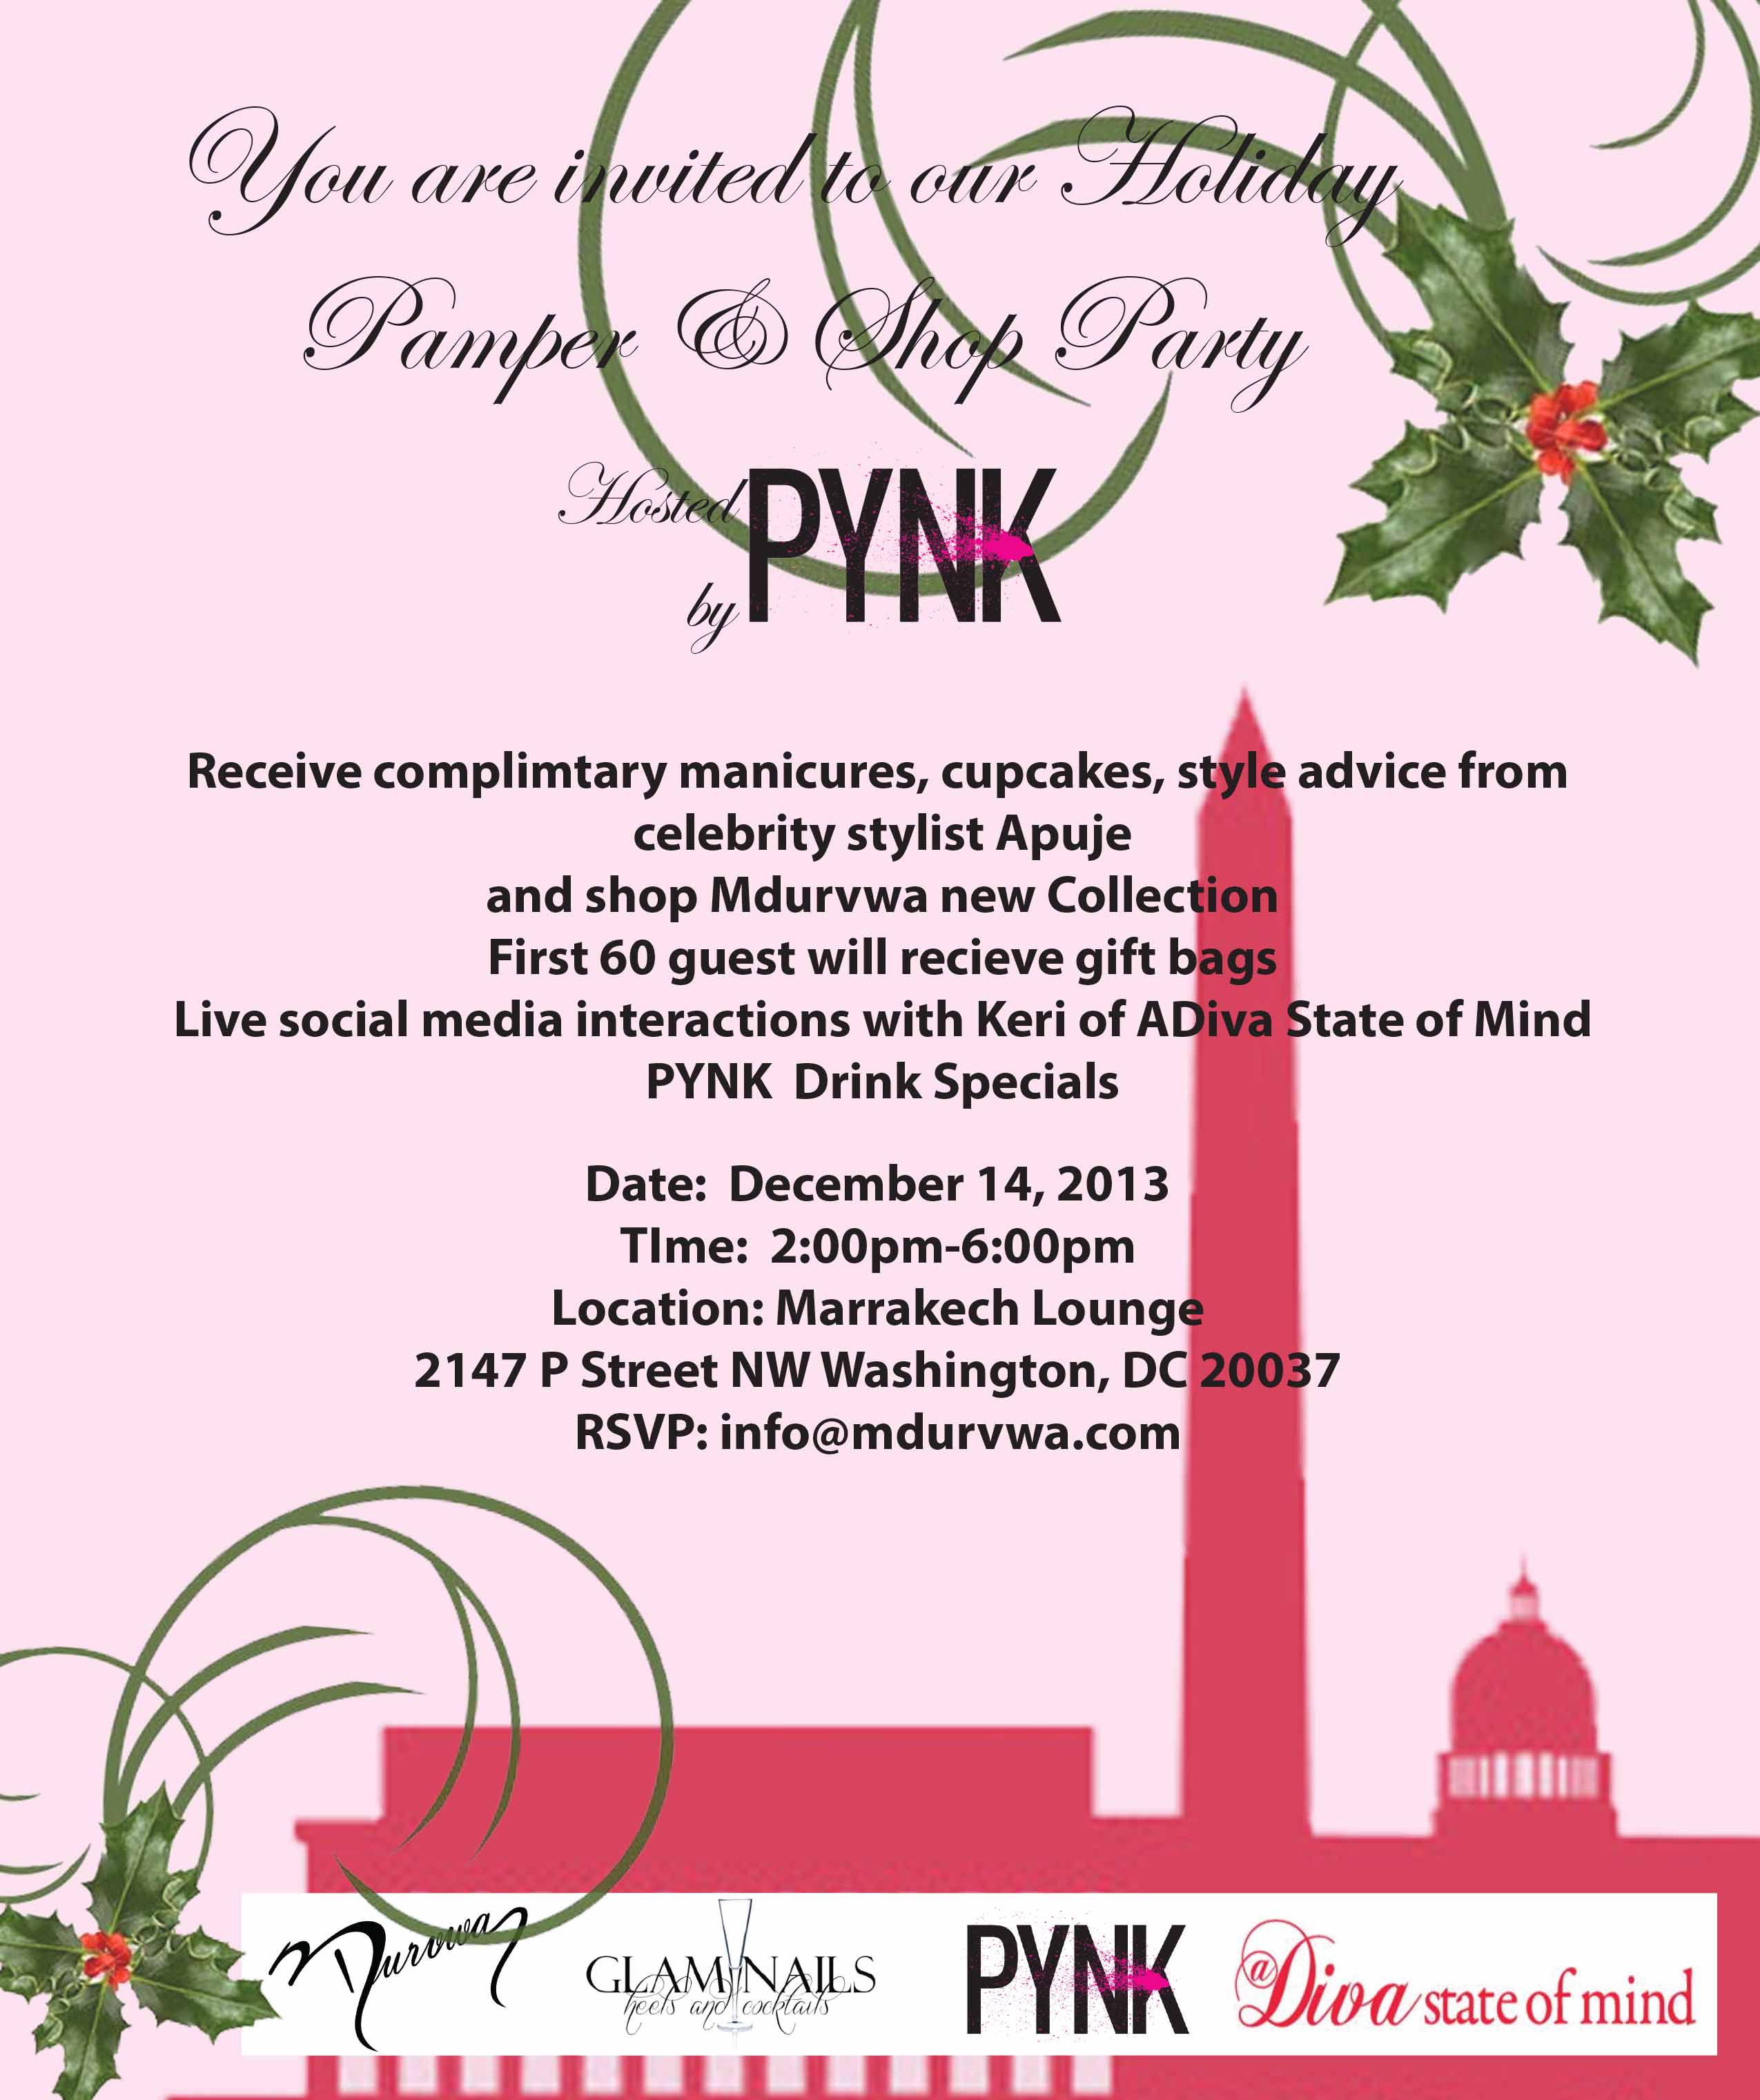 pynk party 3 You’re Invited: Join Me For A Holiday Pamper & Shop Party